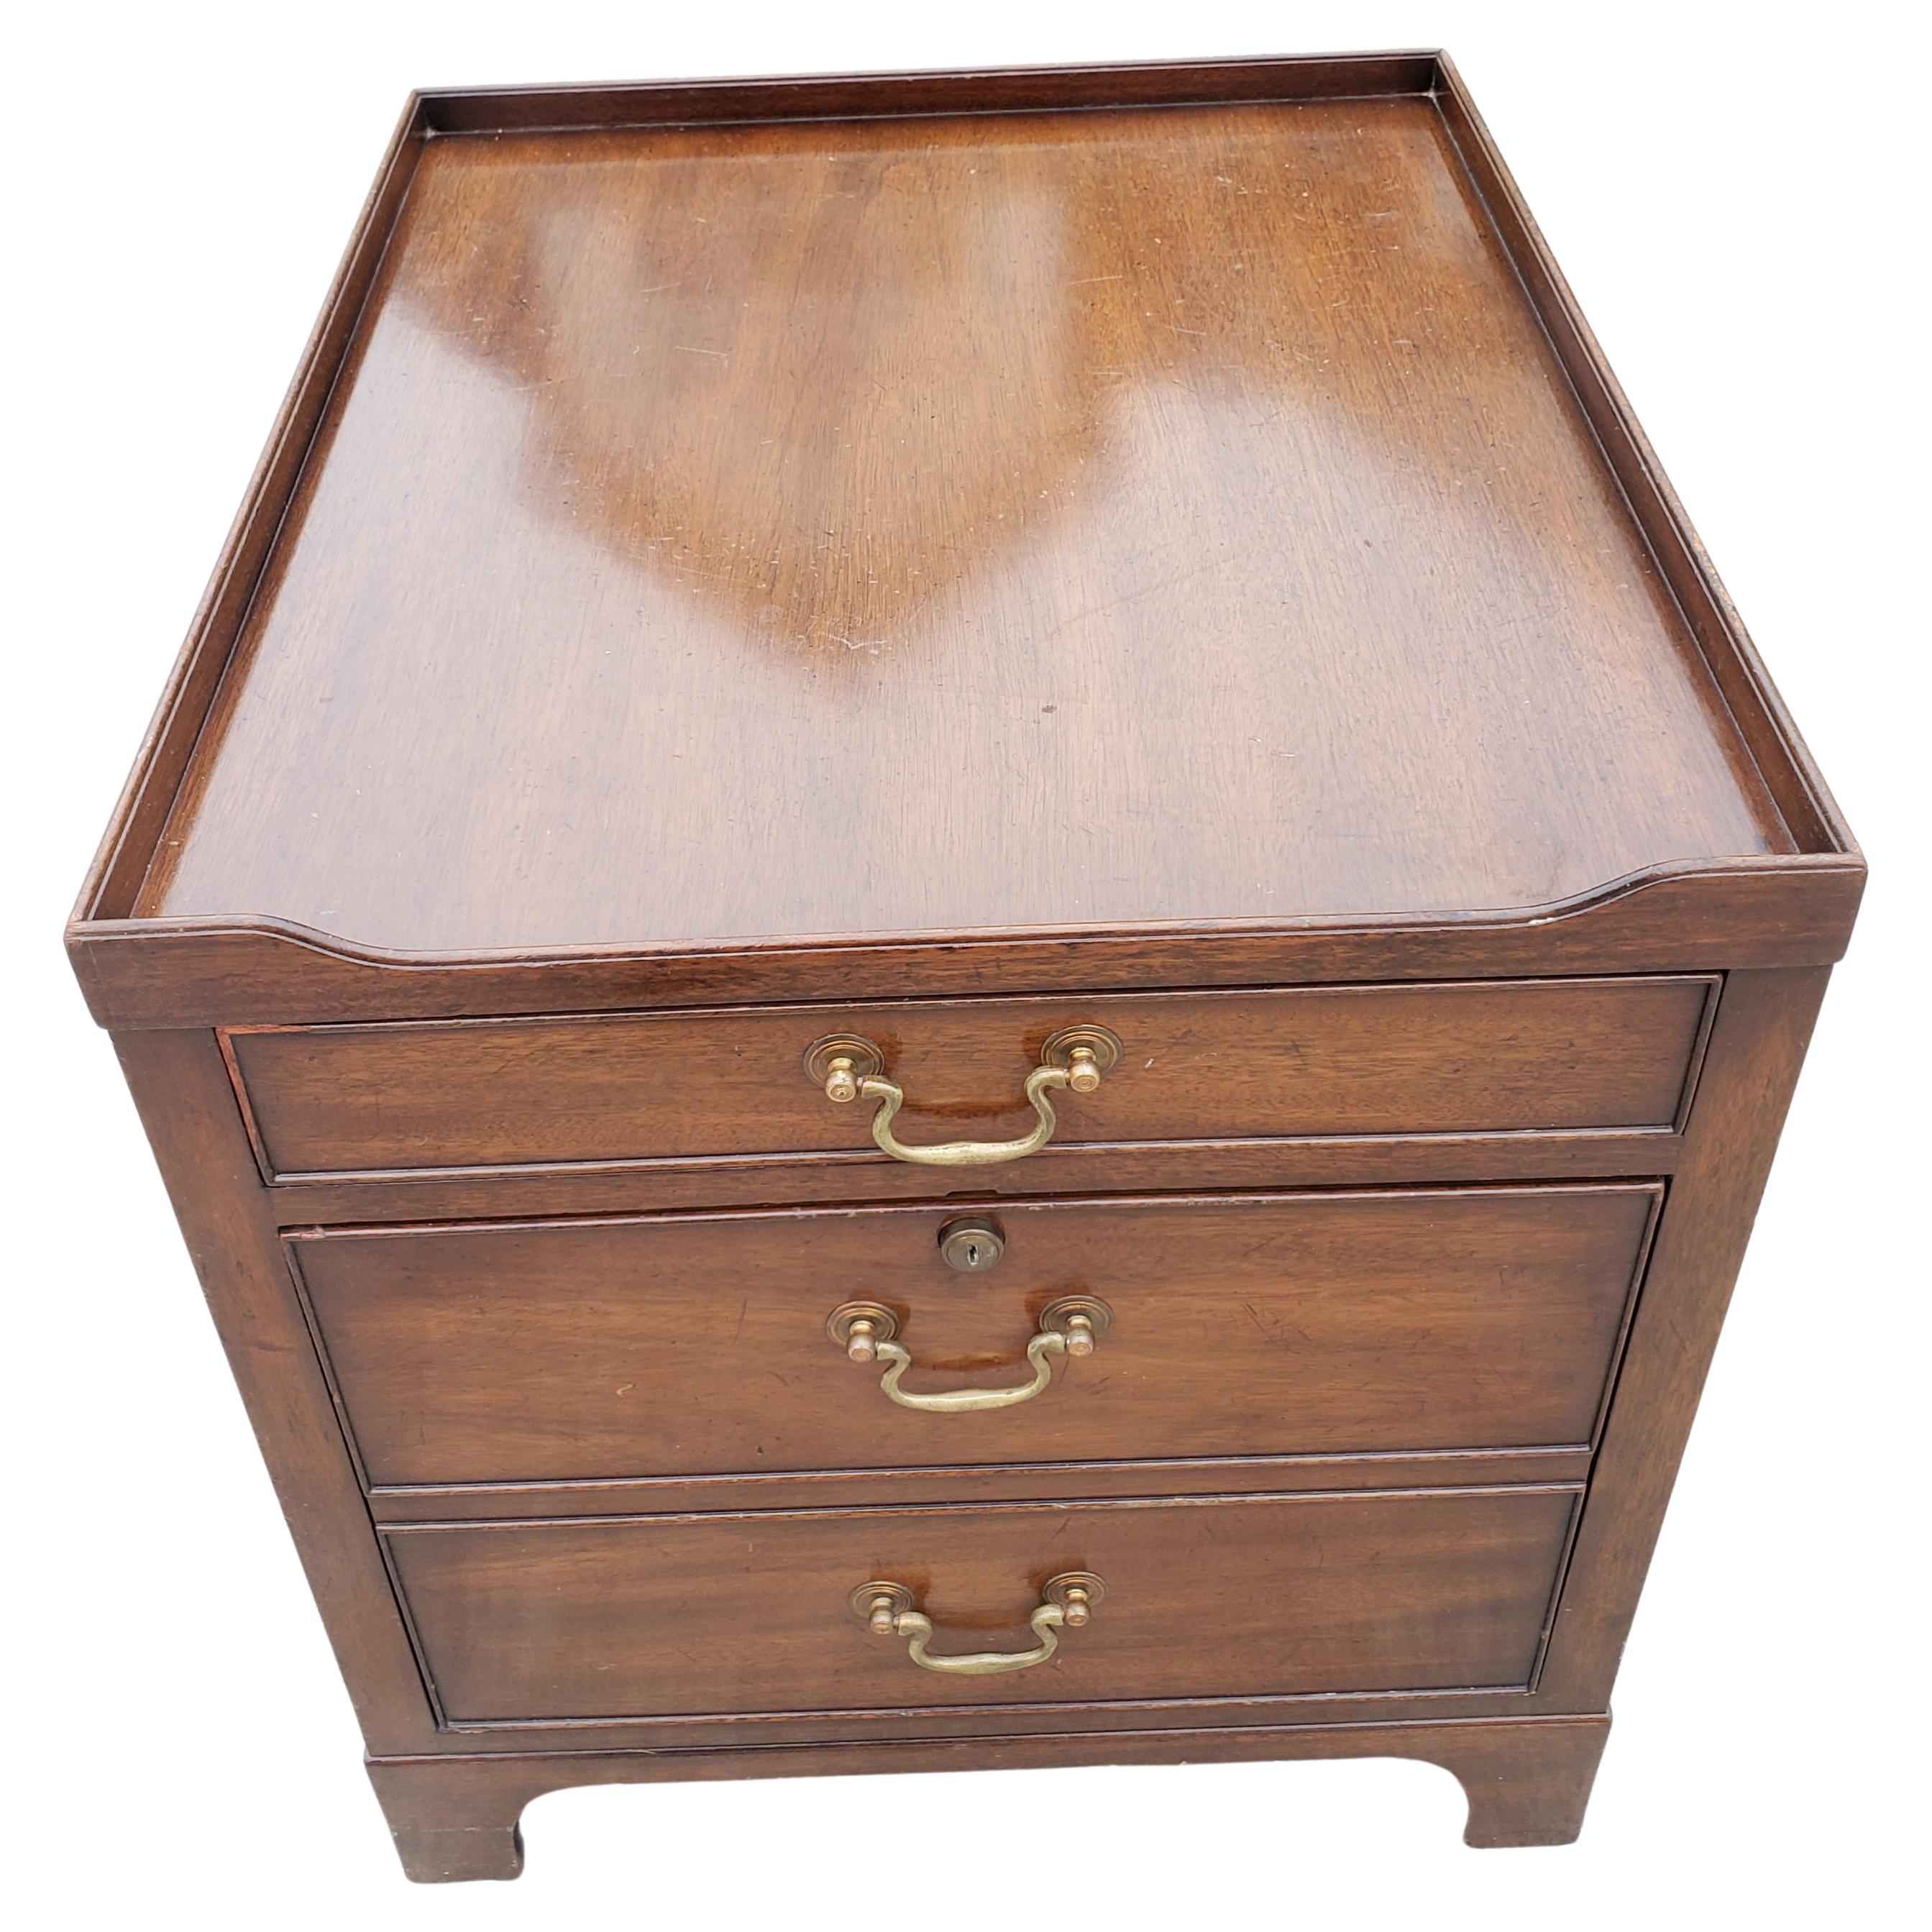 Kittinger mahogany end table that is also a file cabinet. Built to hold large files (legal size) as well as regular size (letter). Very solid construction. Very deep drawers to hold good amount of files. Drawers functioning perfectly. Good vintage